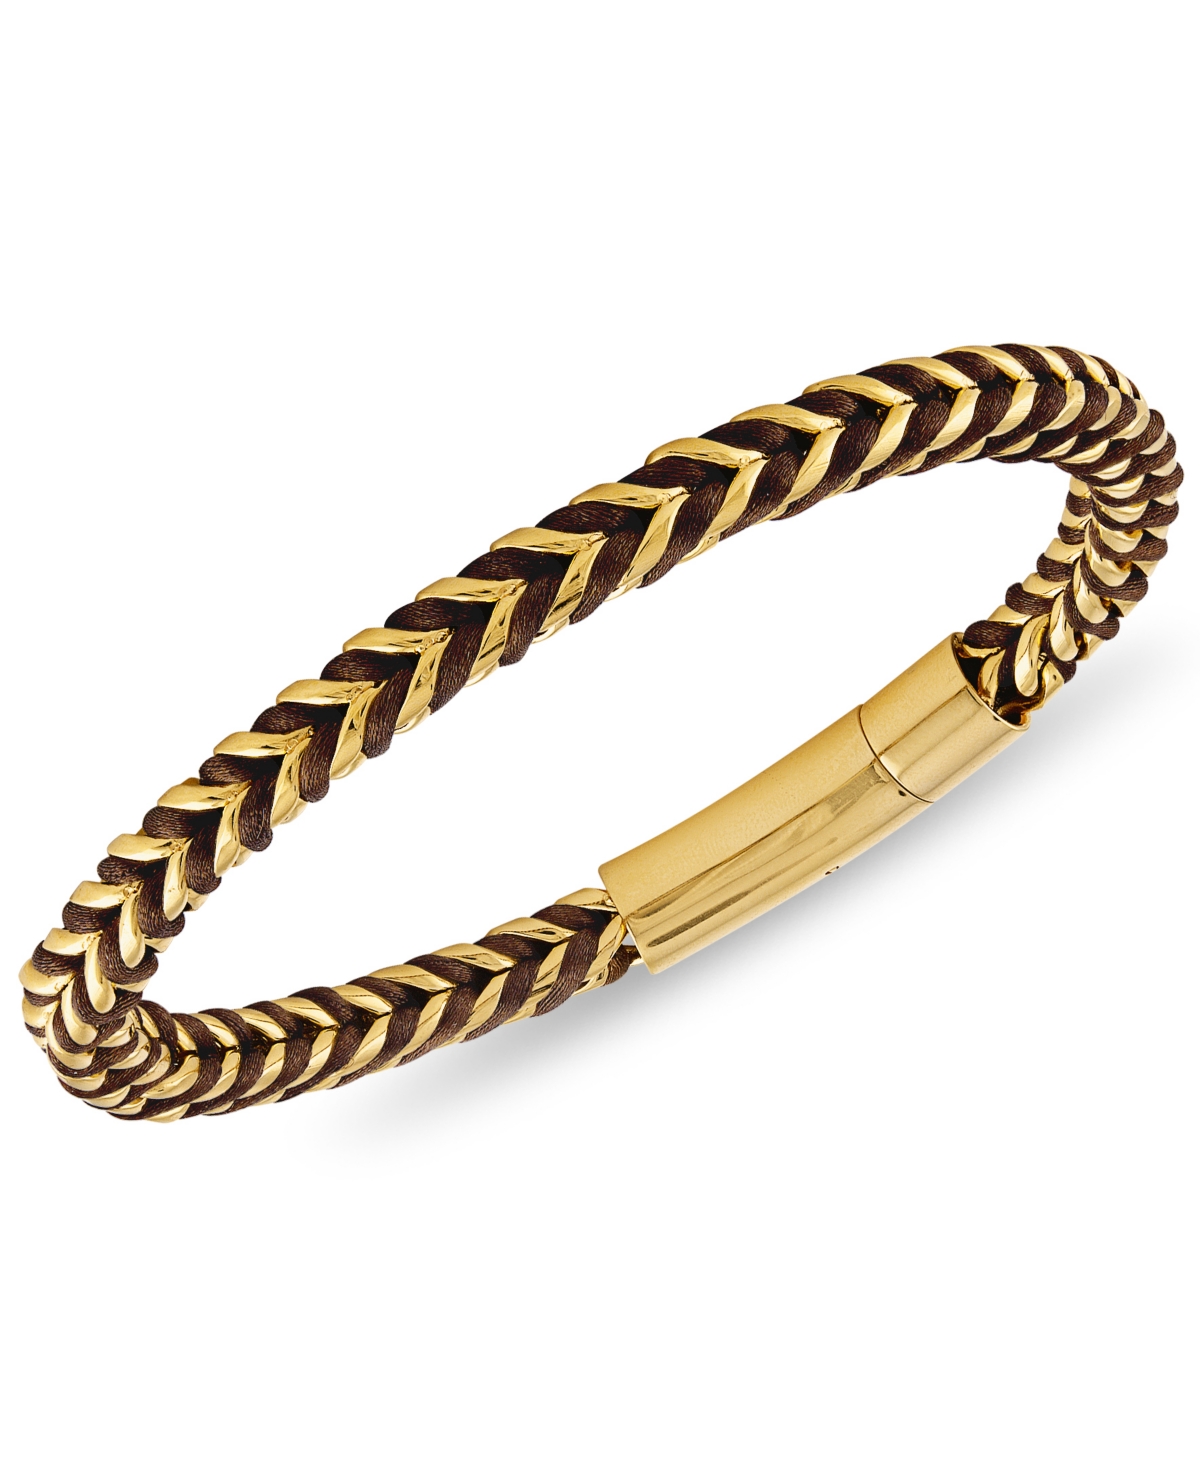 Nylon Cord Statement Bracelet in Gold Ion-Plated Stainless Steel or Stainless Steel, Created for Macy's - Black/Gold-Tone